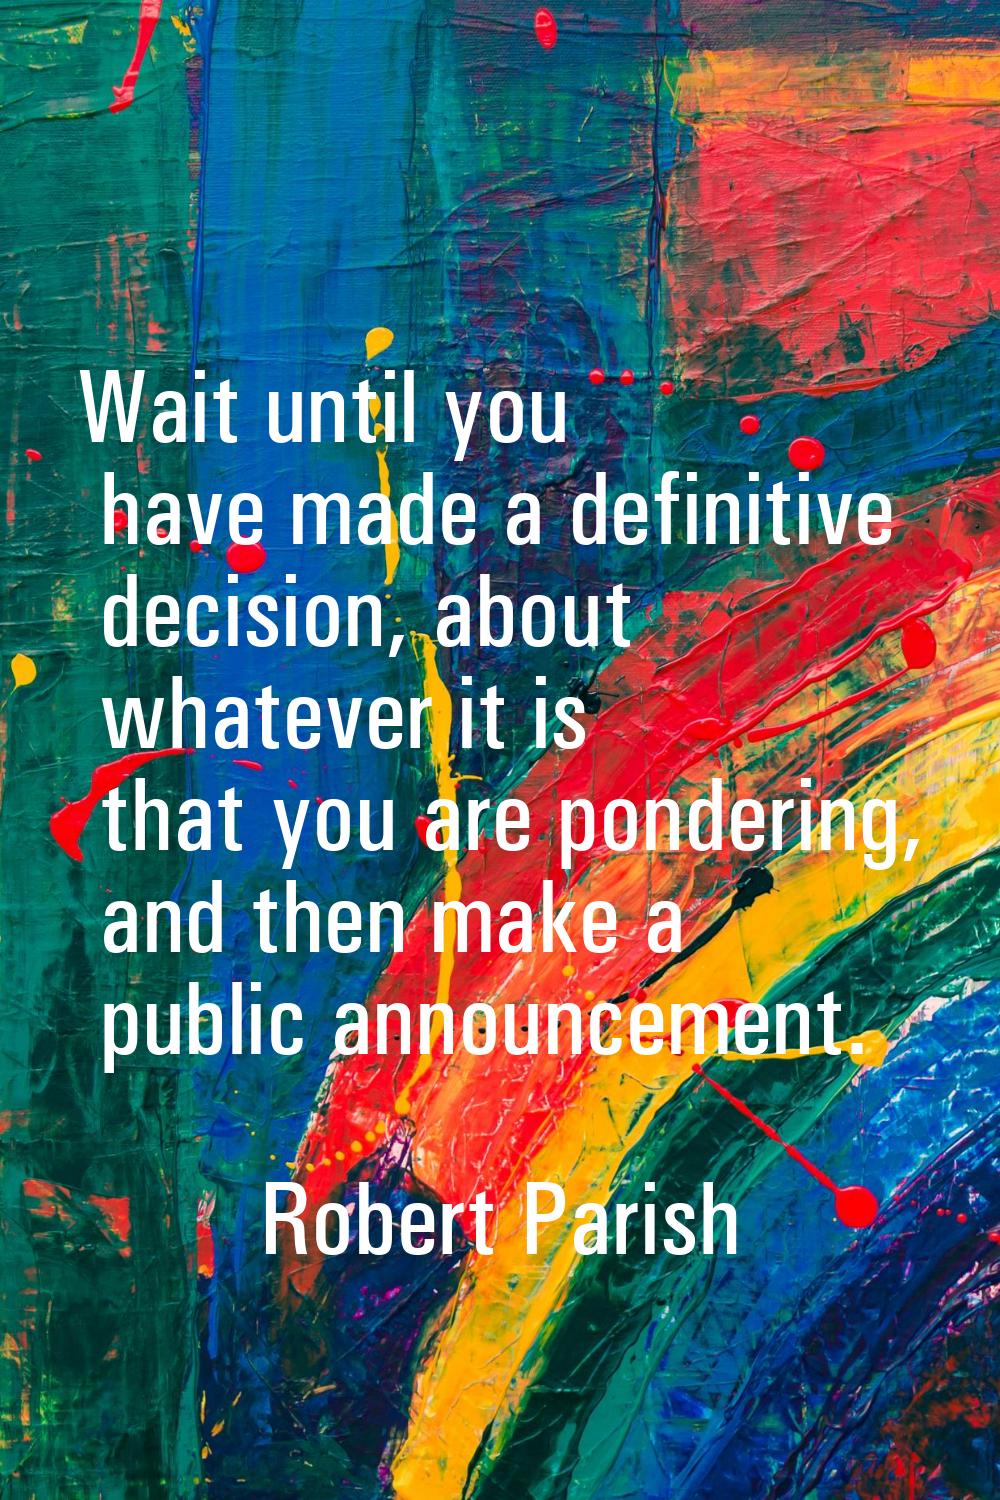 Wait until you have made a definitive decision, about whatever it is that you are pondering, and th